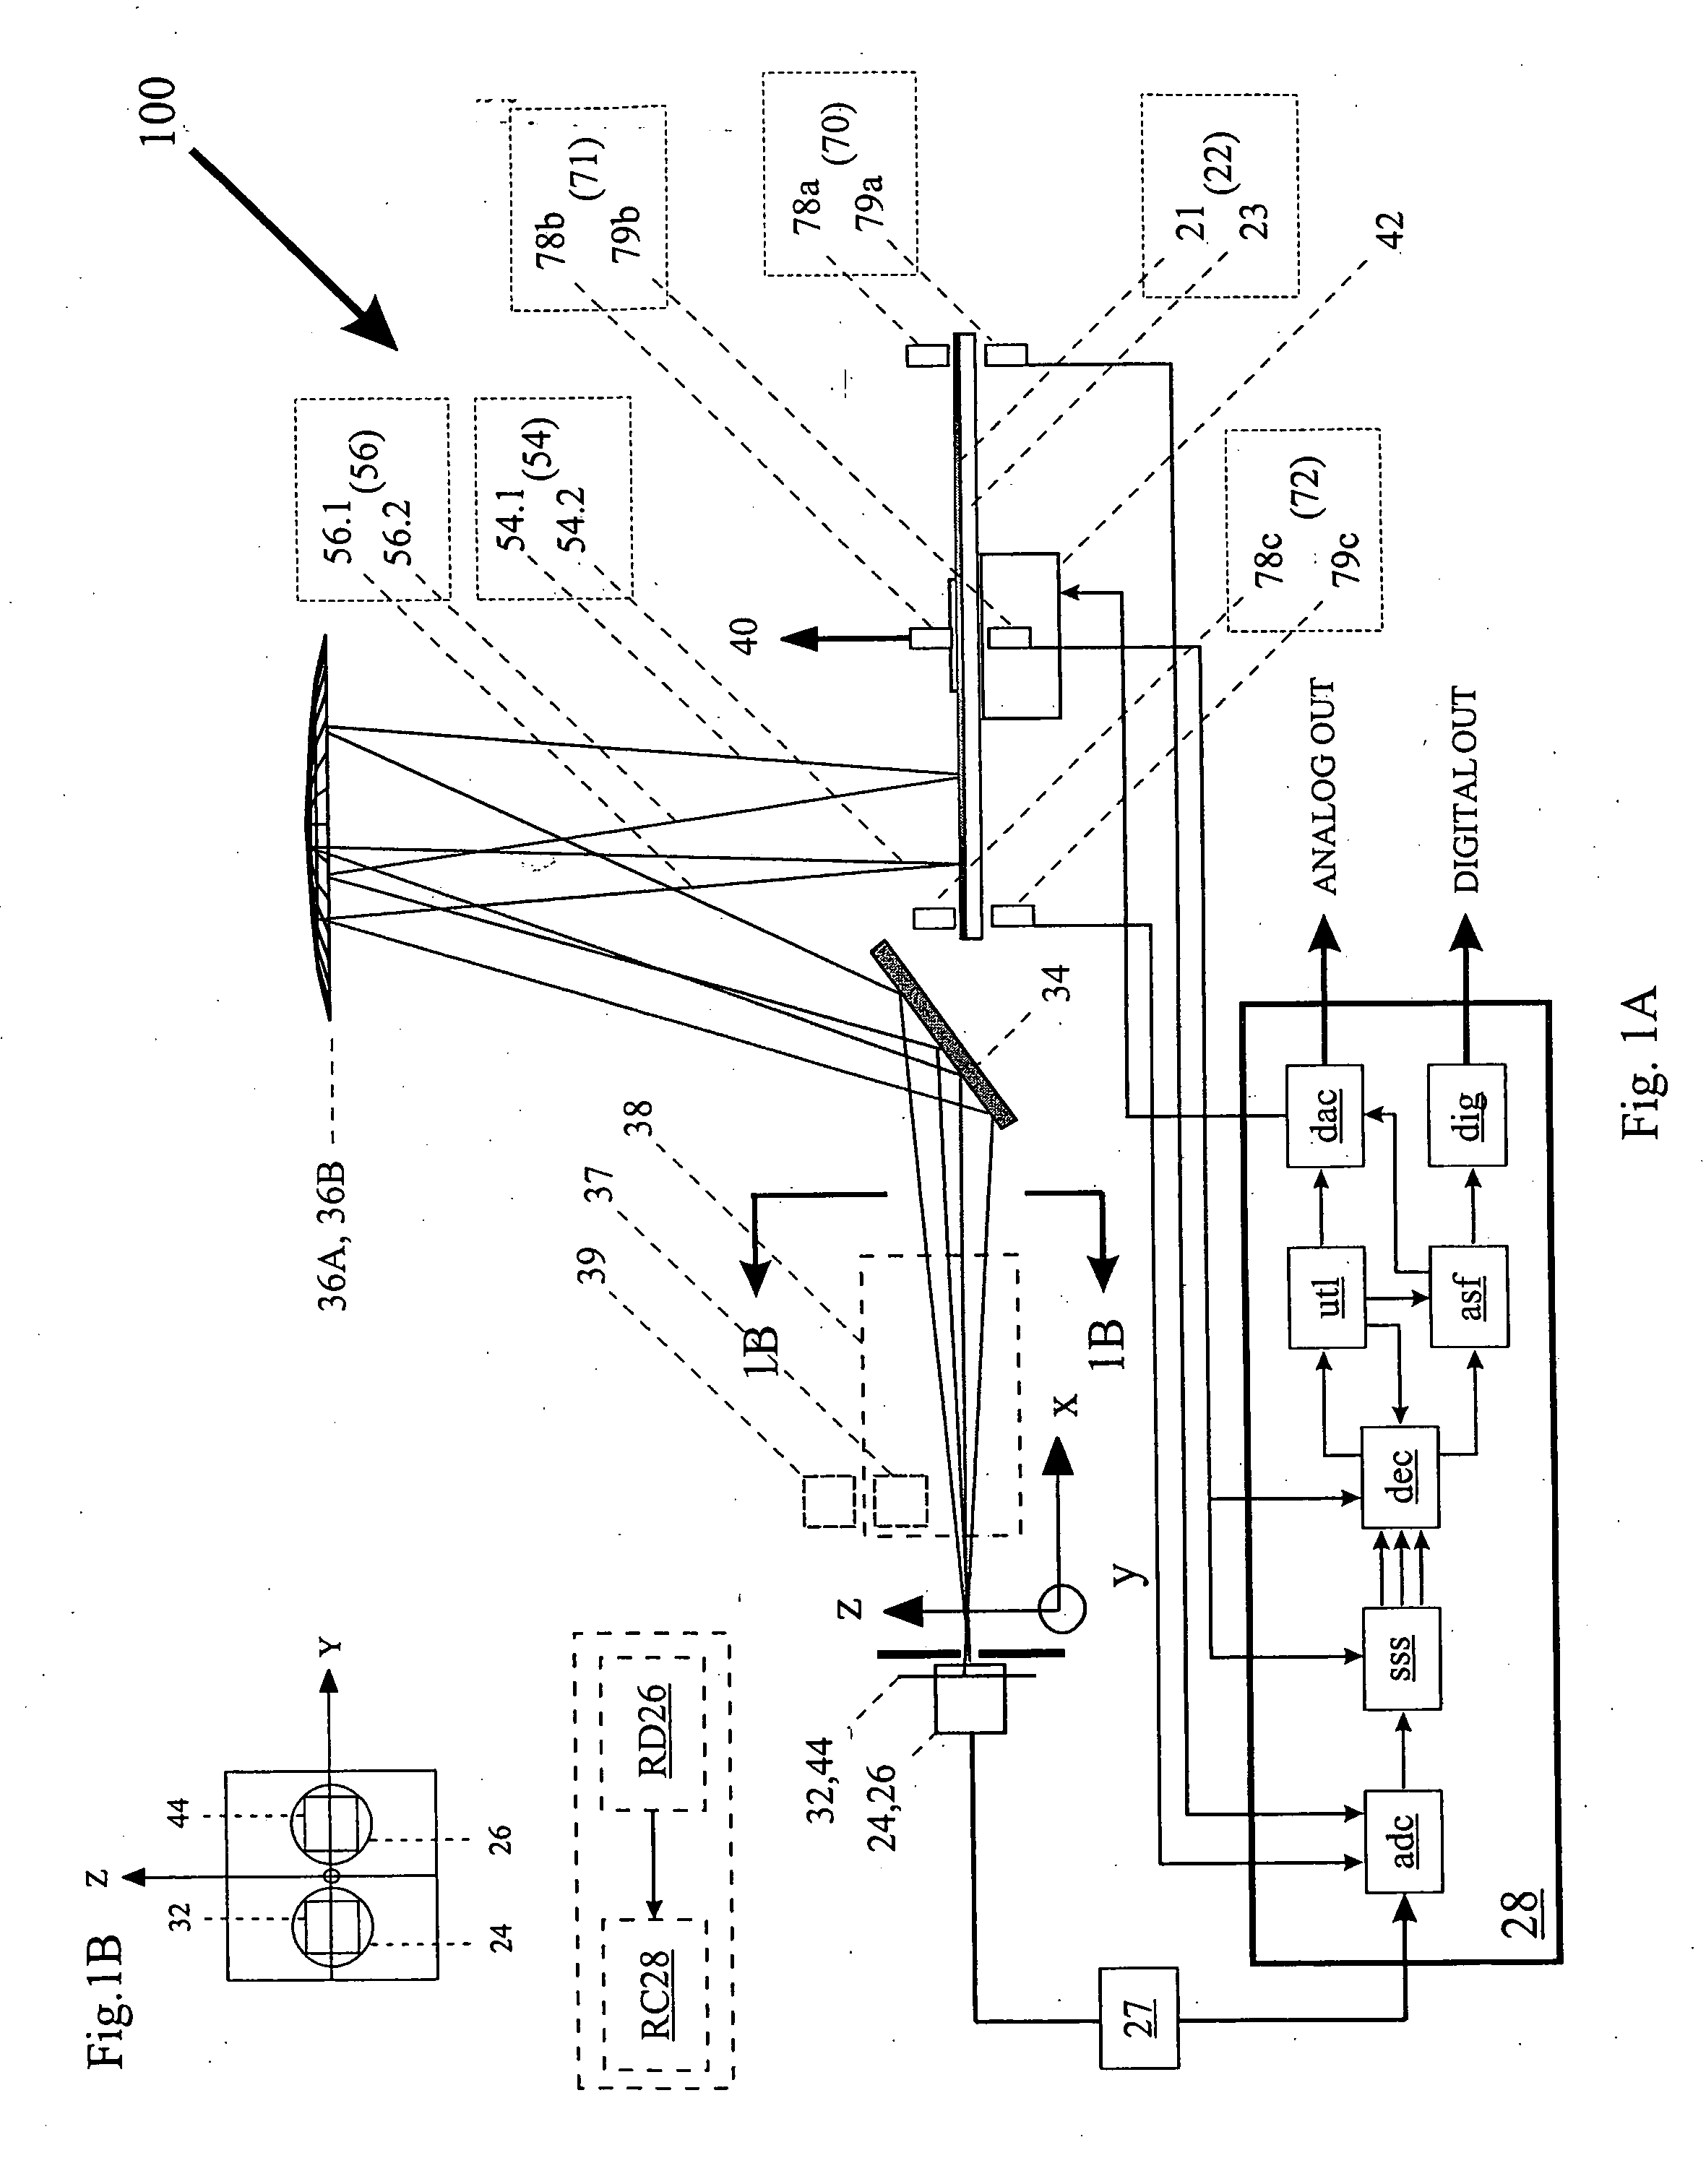 Method and apparatus for radiation encoding and analysis